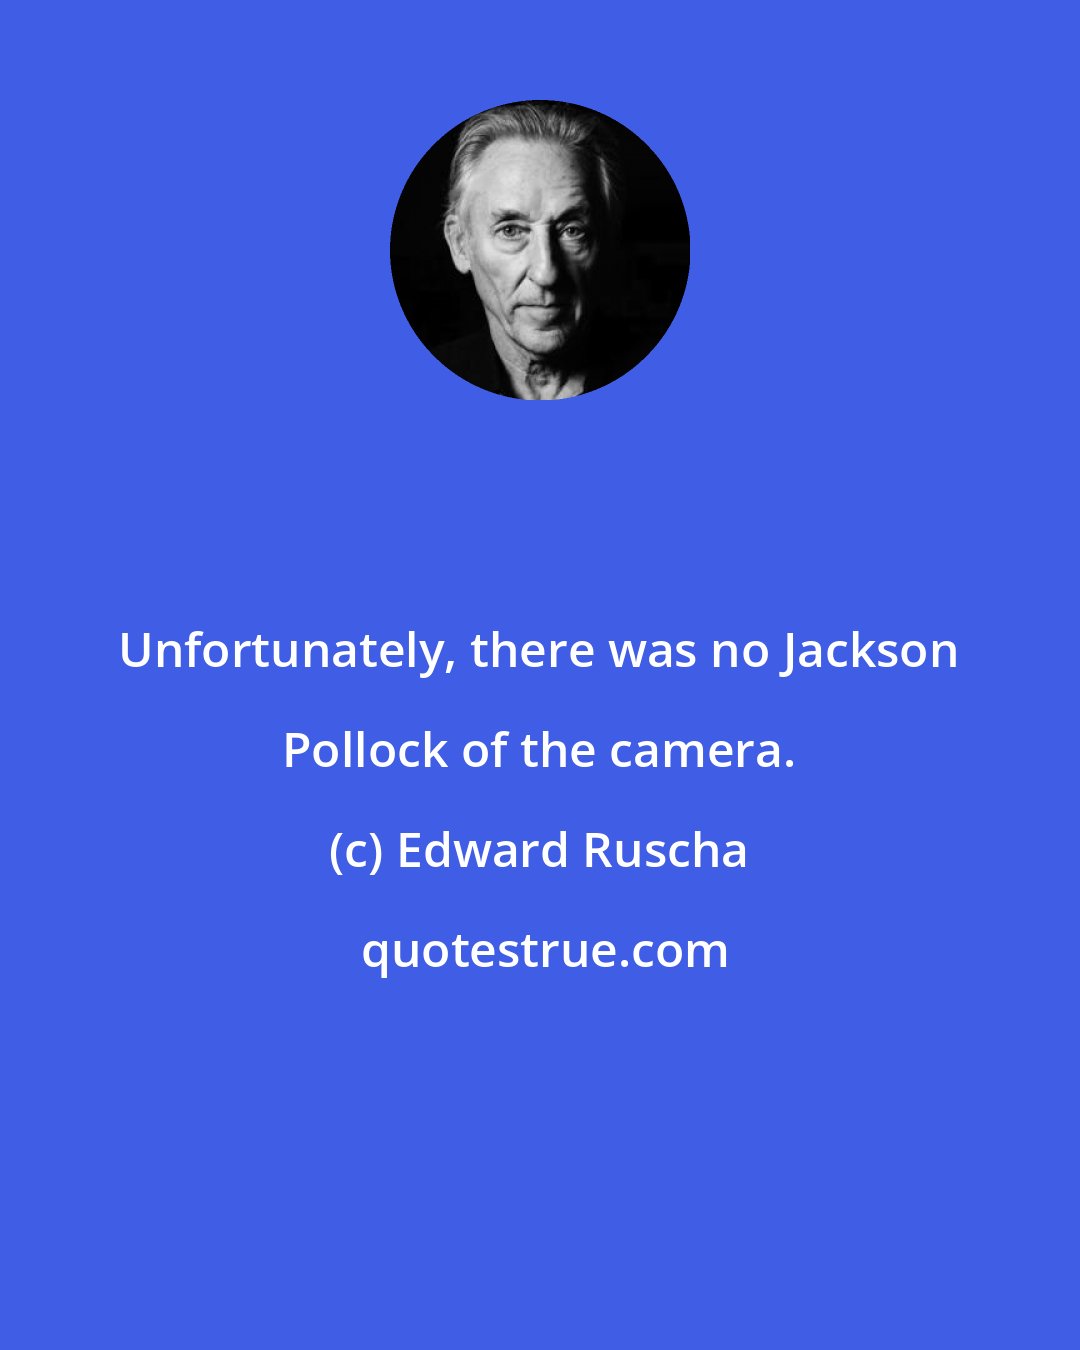 Edward Ruscha: Unfortunately, there was no Jackson Pollock of the camera.